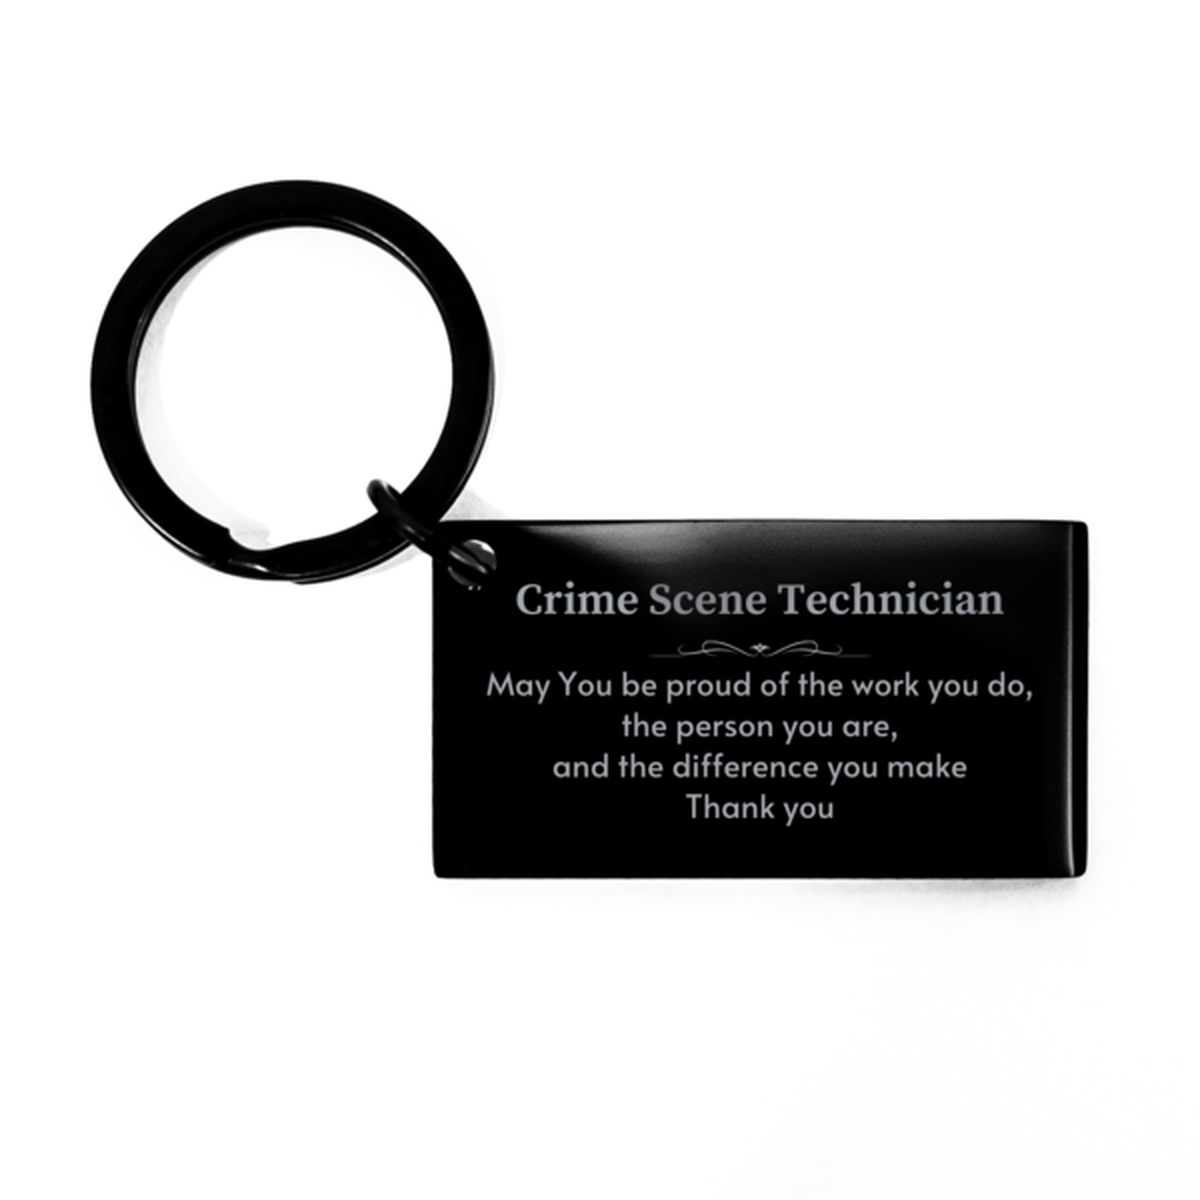 Heartwarming Keychain Retirement Coworkers Gifts for Crime Scene Technician, Florist May You be proud of the work you do, the person you are Gifts for Boss Men Women Friends